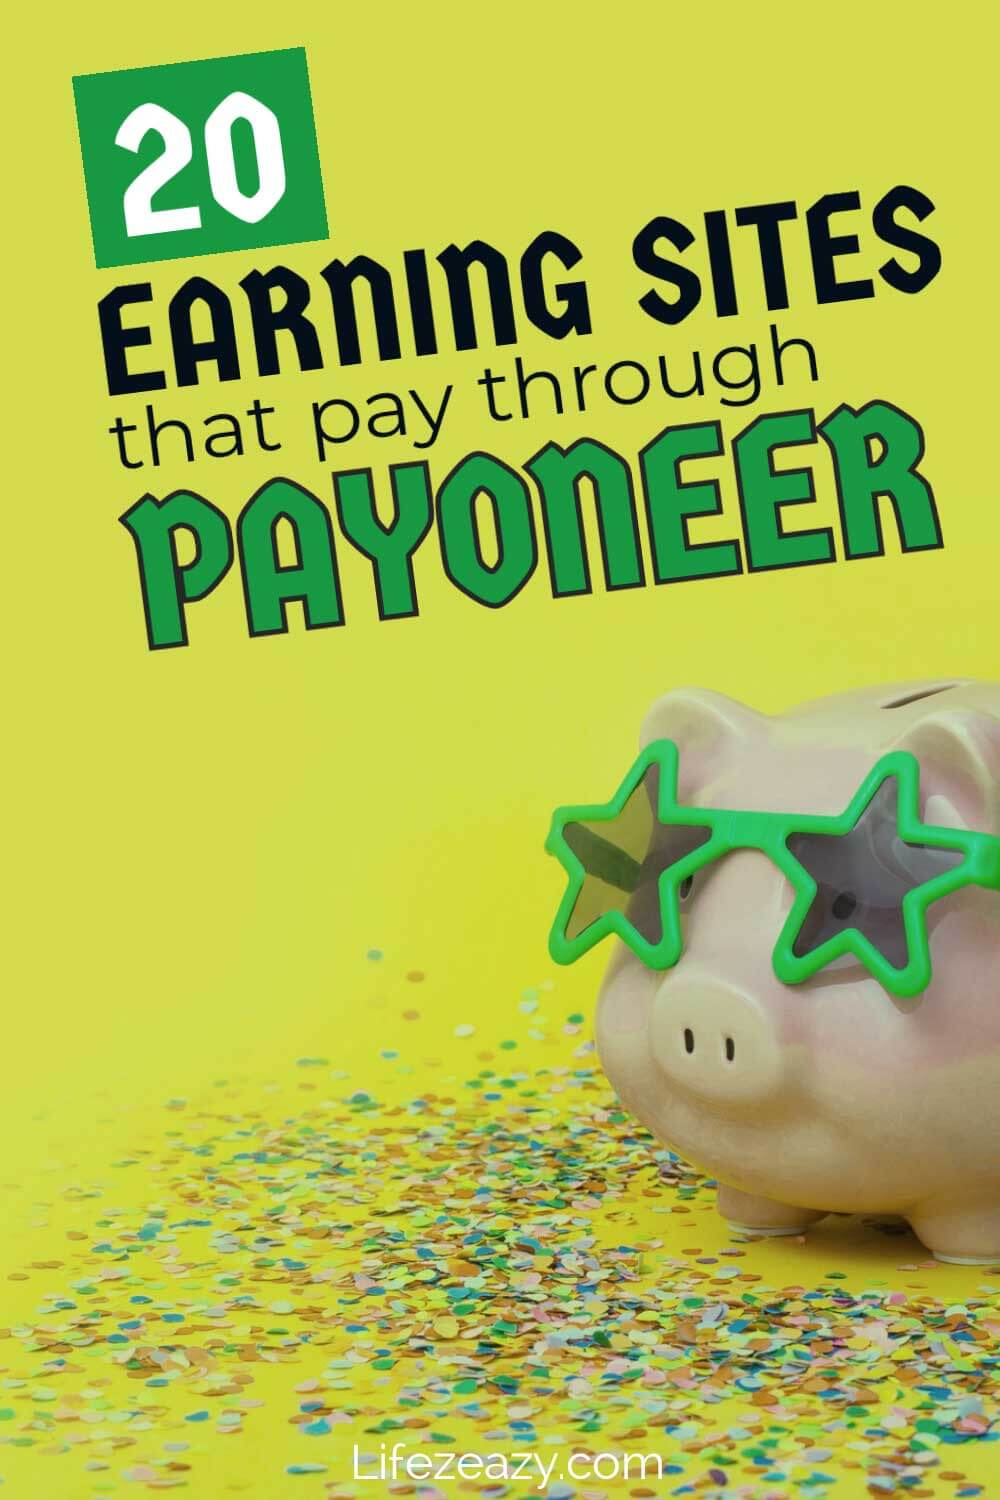 Earning sites that pay through Payoneer